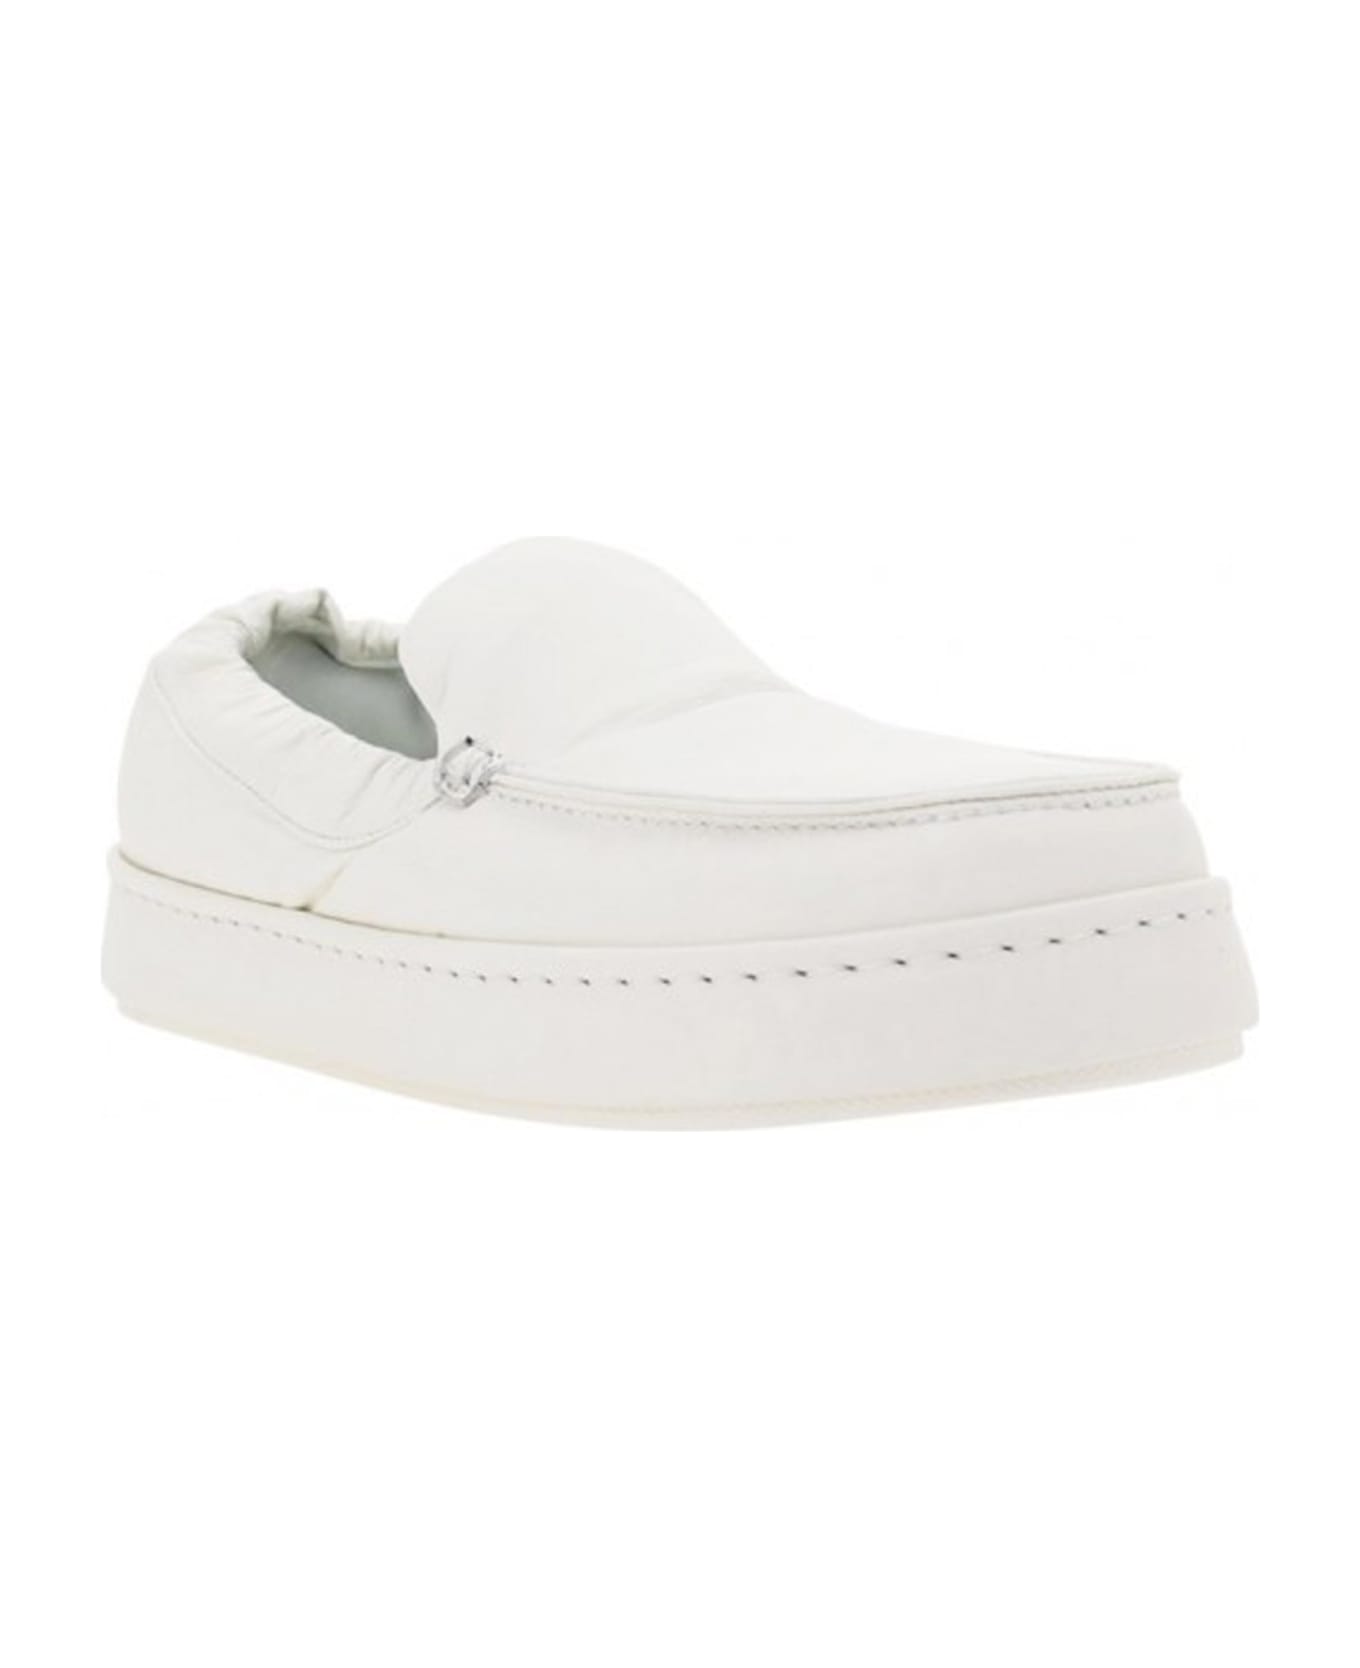 Zegna Leather Loafers - White